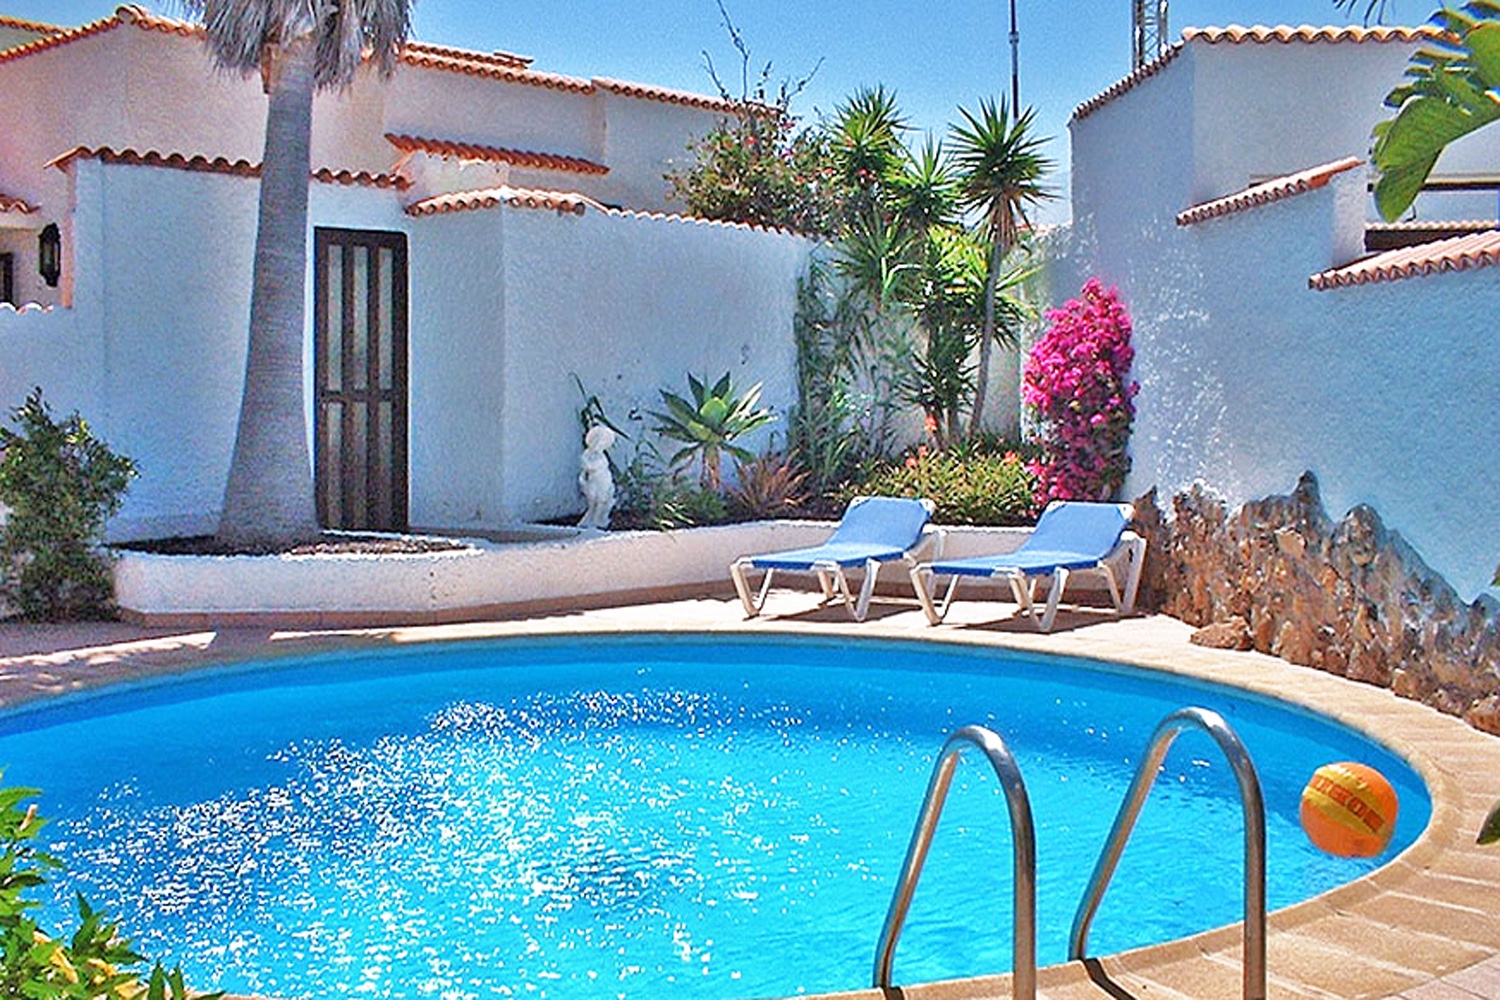 House for rent in the south of Tenerife with private pool near the beach of Porís de Abona.